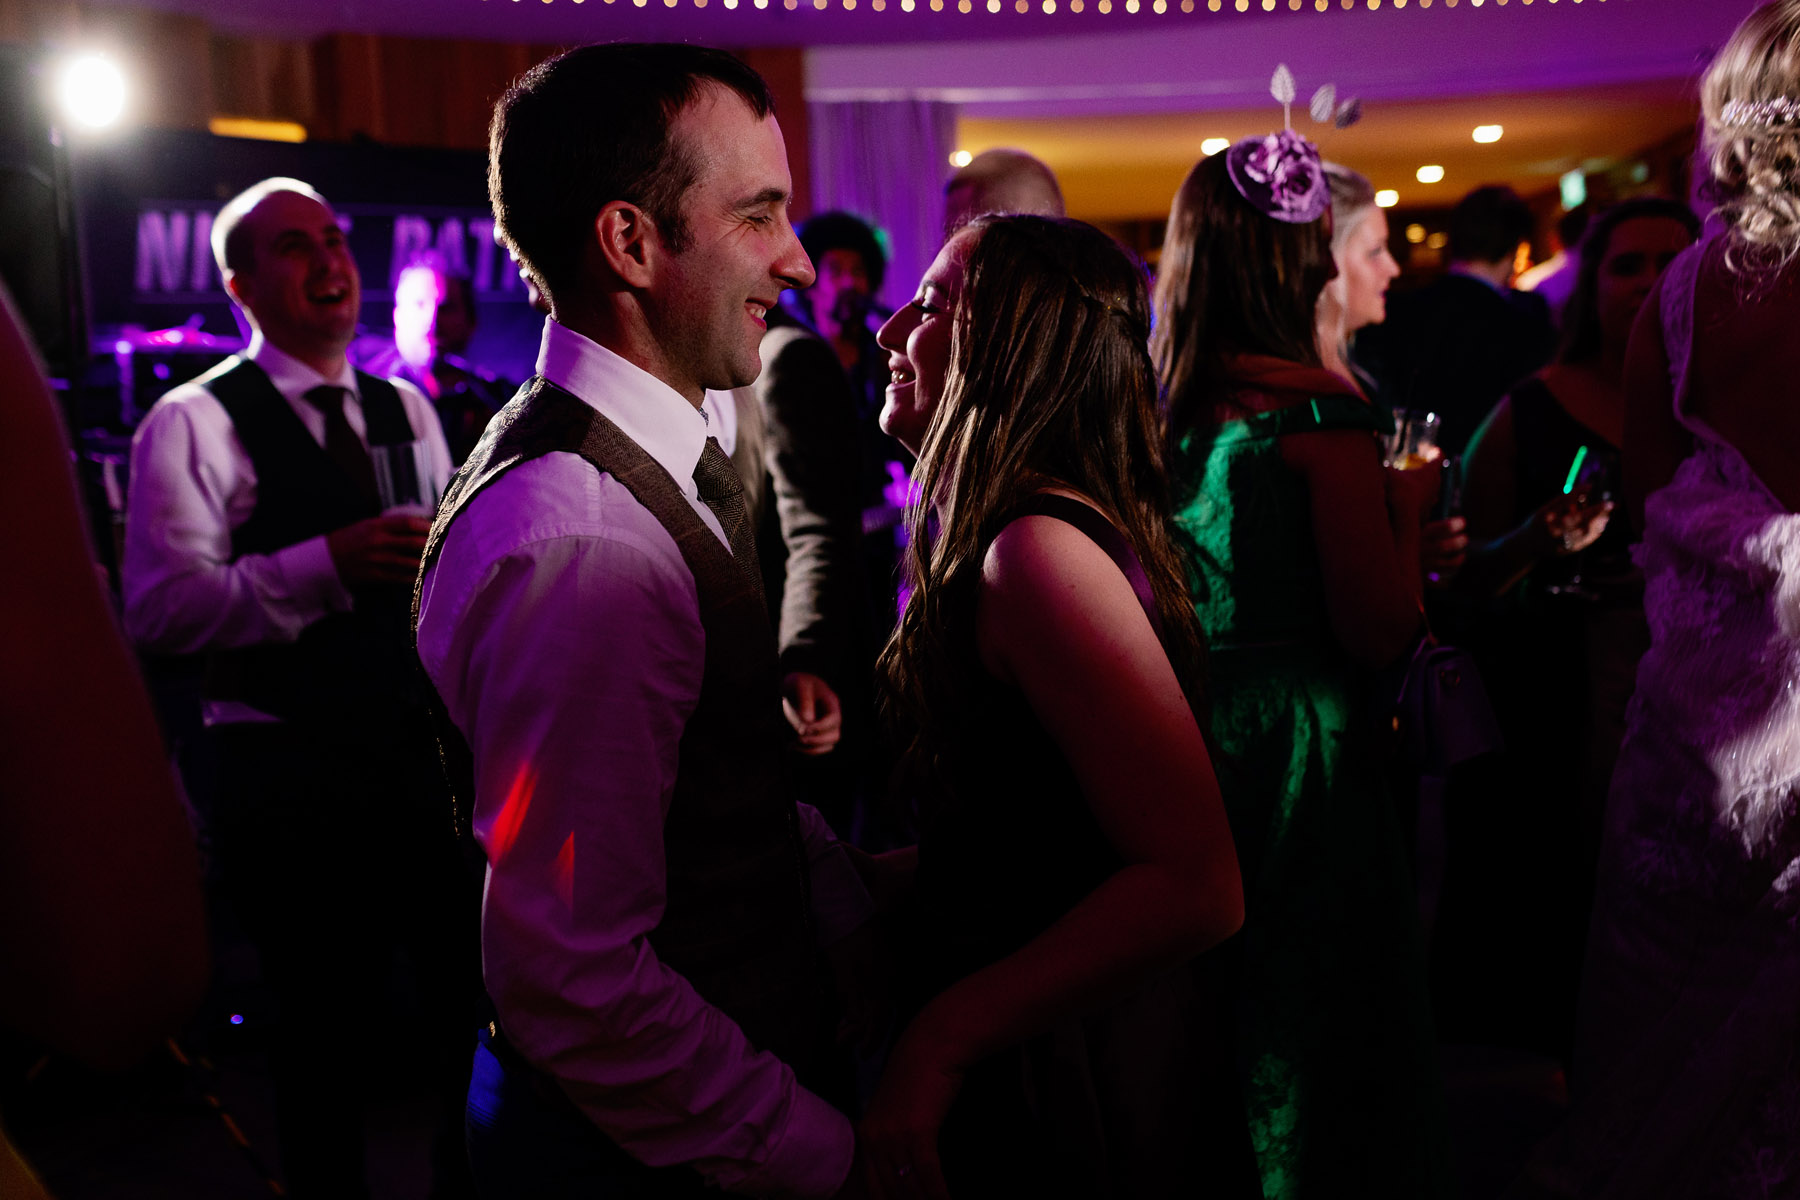 Pictures of Dancing at The Out barn Wedding venue in Lancashire 